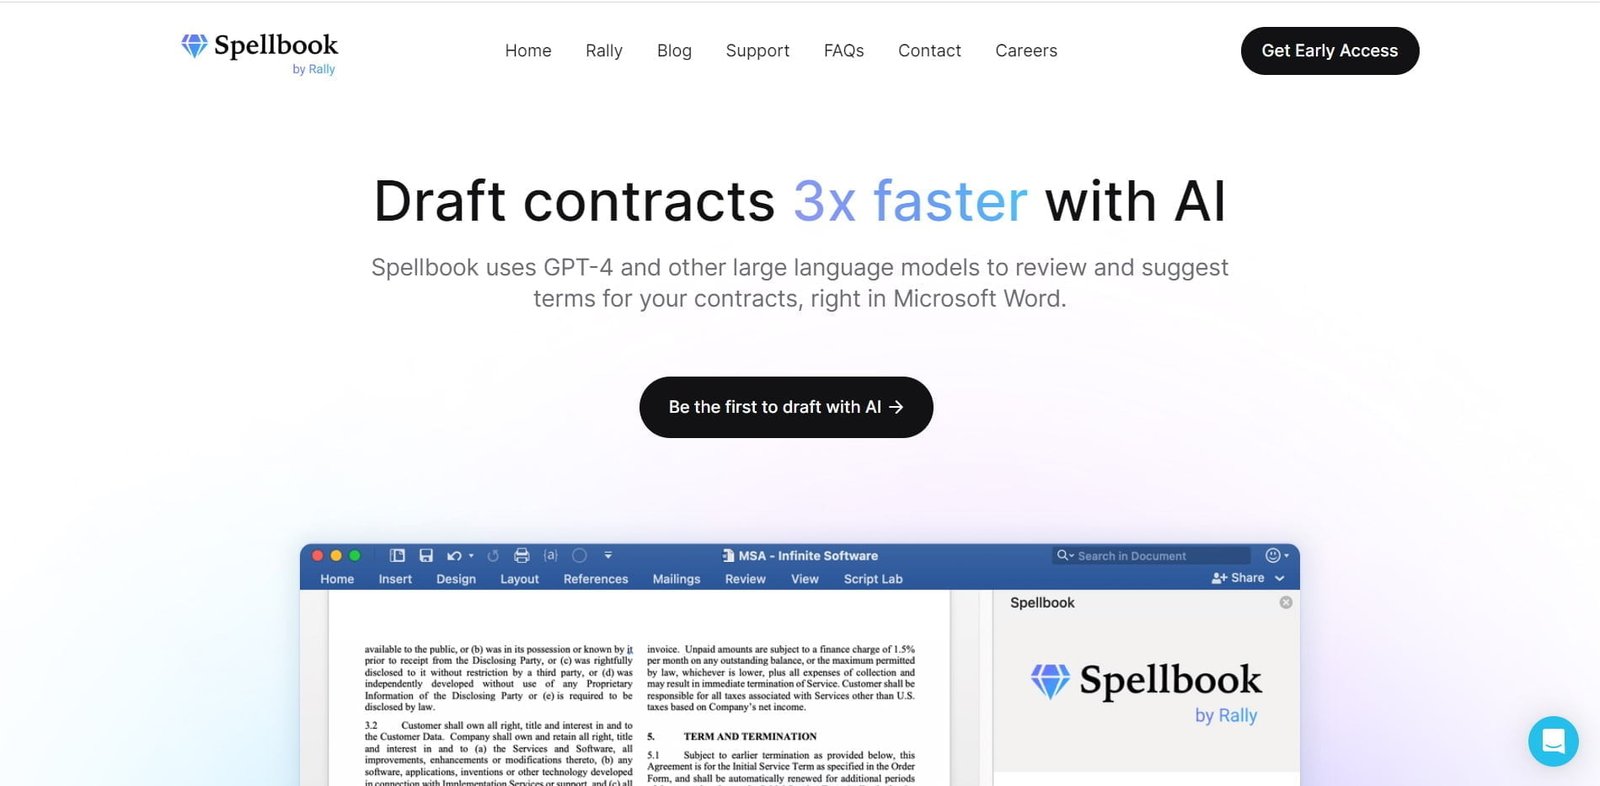 SpellBook is an AI Law platform that harnesses the power of GPT-4 to streamline the contract drafting and review process.